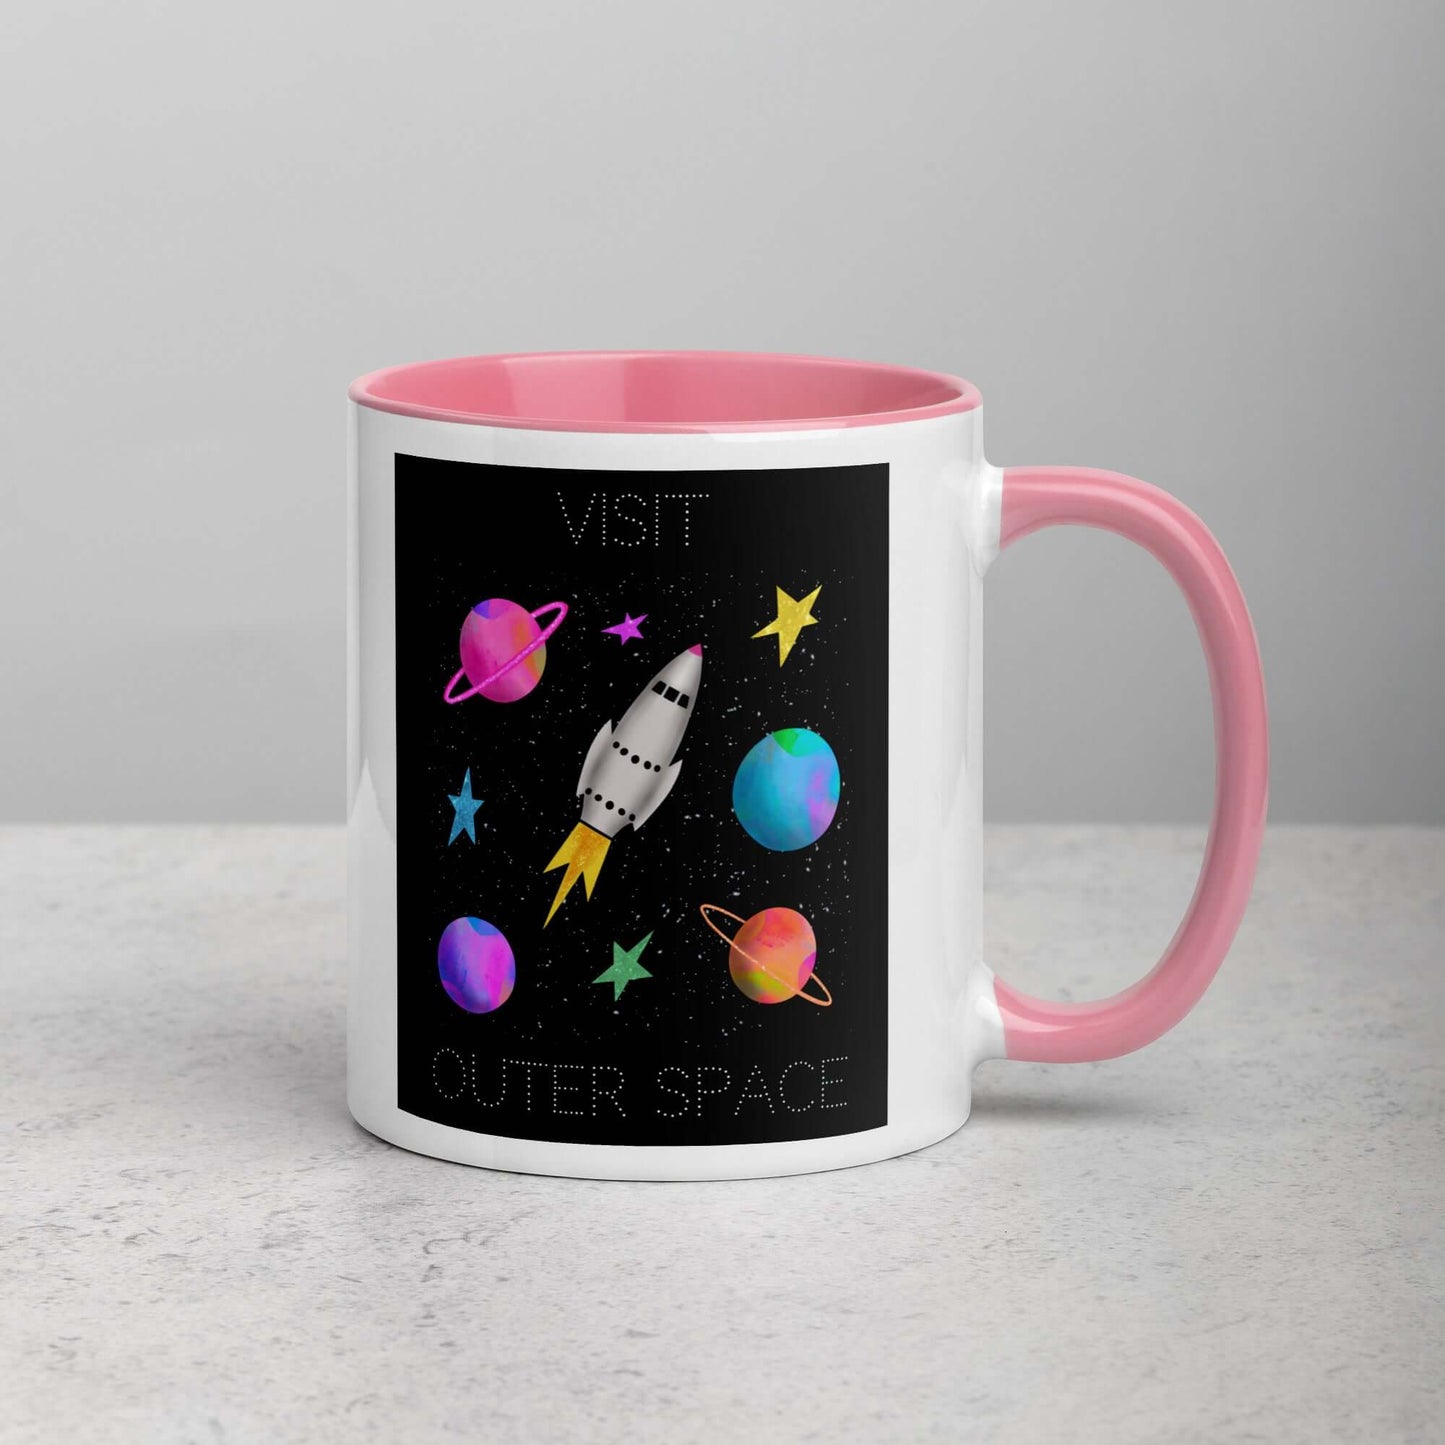 Whimsical Space Rocket with Colorful Planets and Stars on Black Background with Text “Visit Outer Space” Mug with Light Pink Color Inside Right Handed Front View